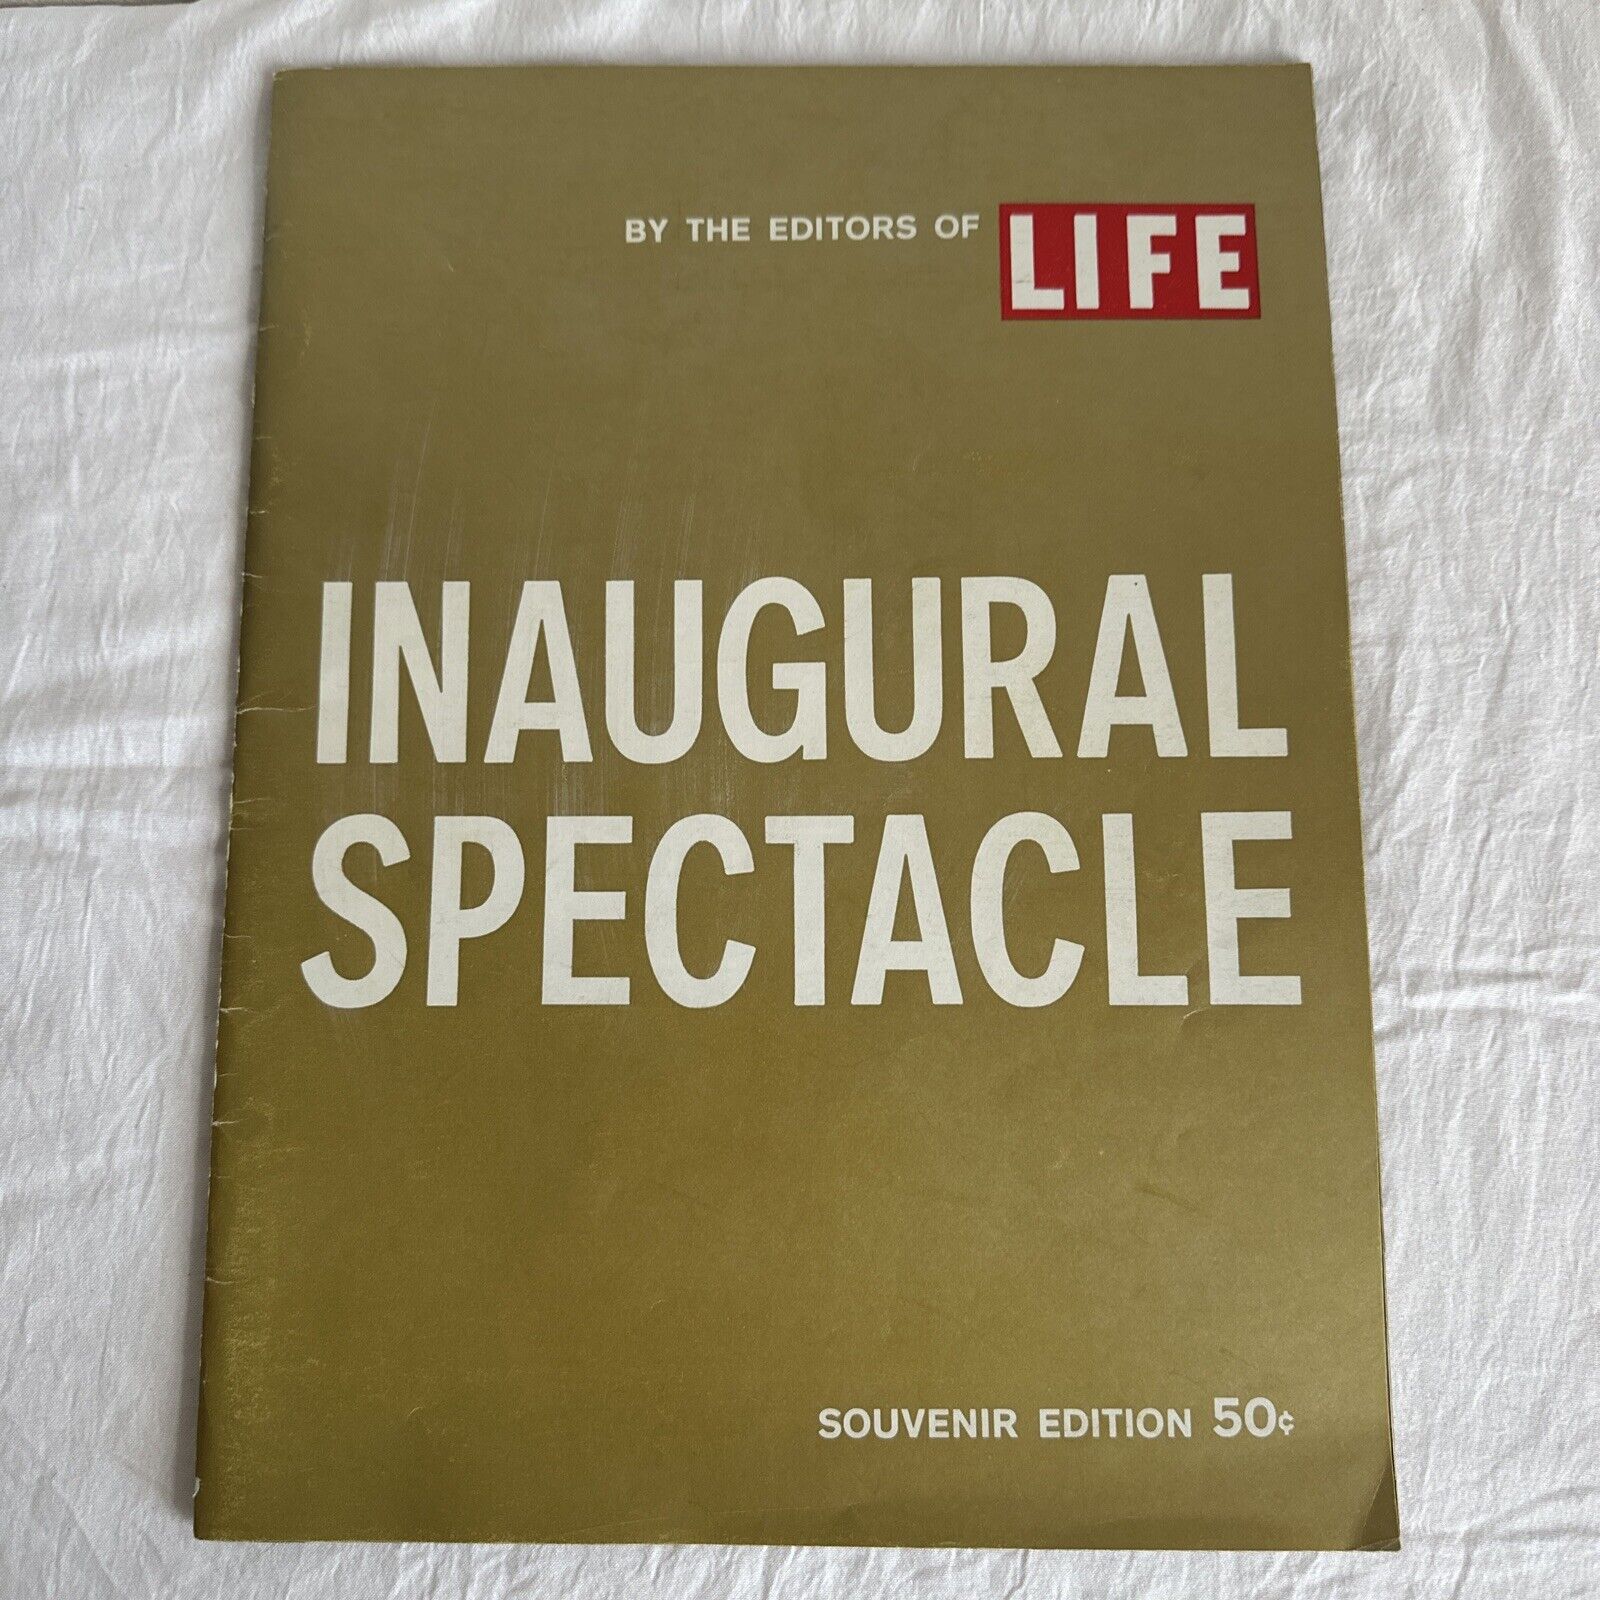 Vintage 1961 Life Magazine J.F. Kennedy “Inaugural Spectacle” Souvenir Edition  